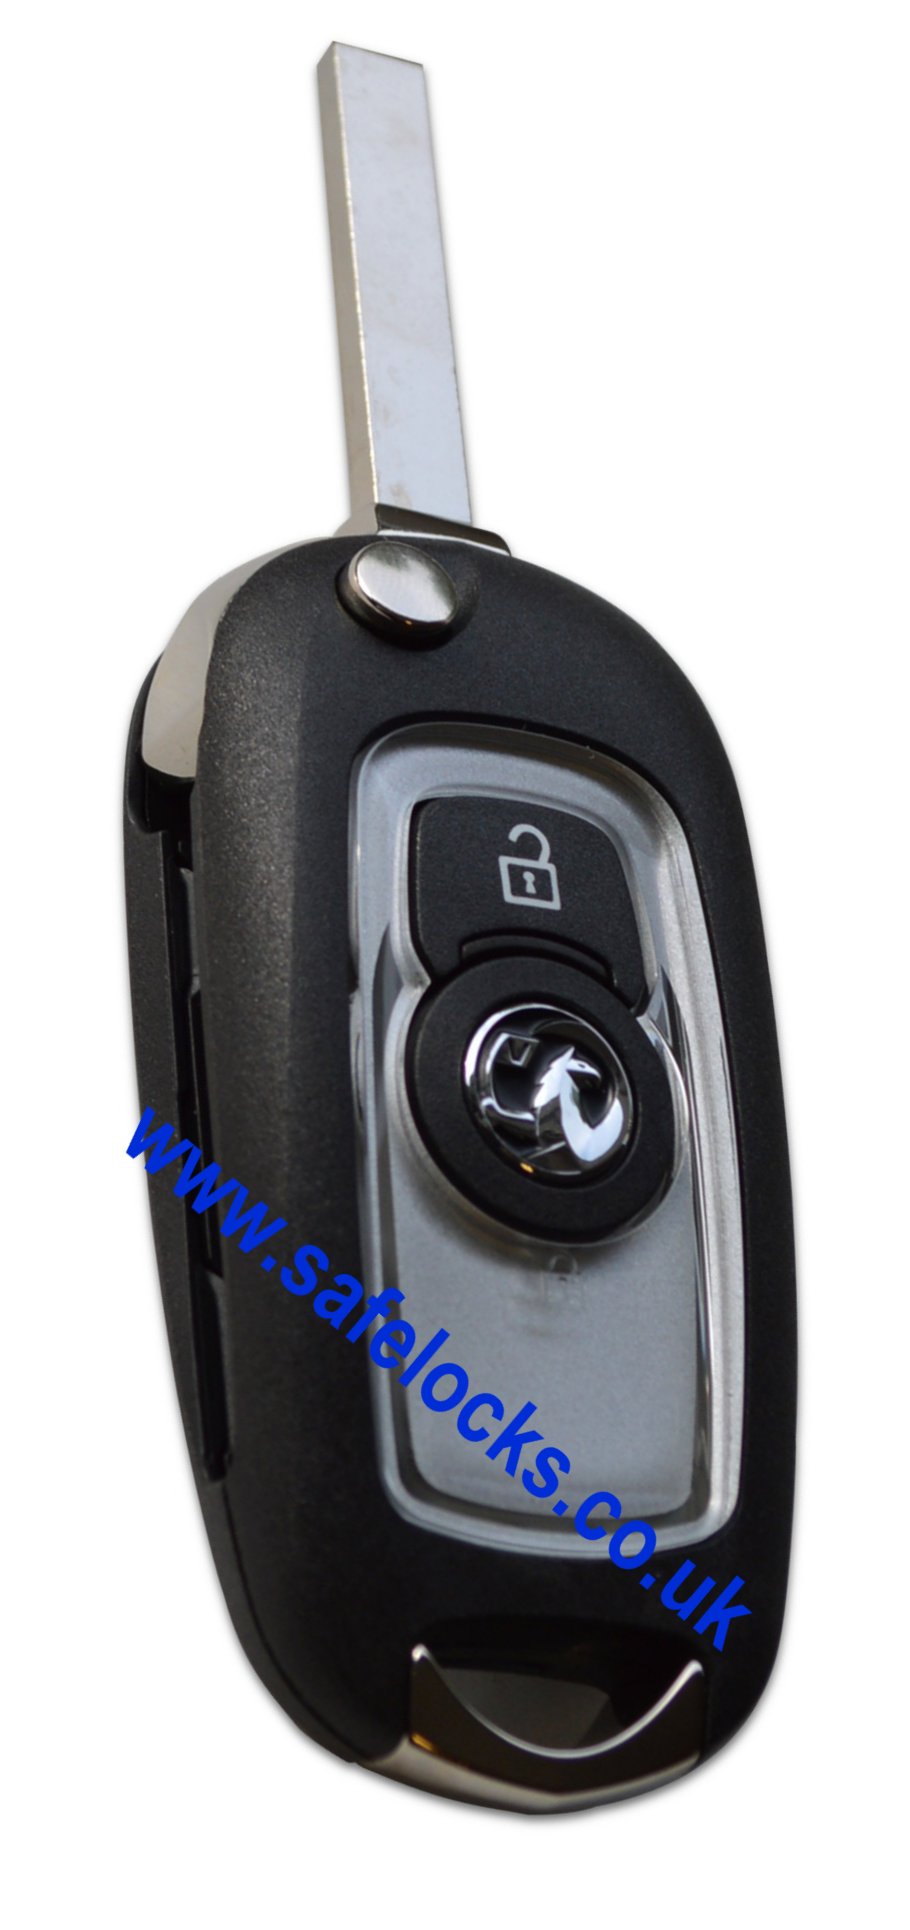 Vauxhall Astra K 2015-2017 Silver 2 button remote key fob 39061468